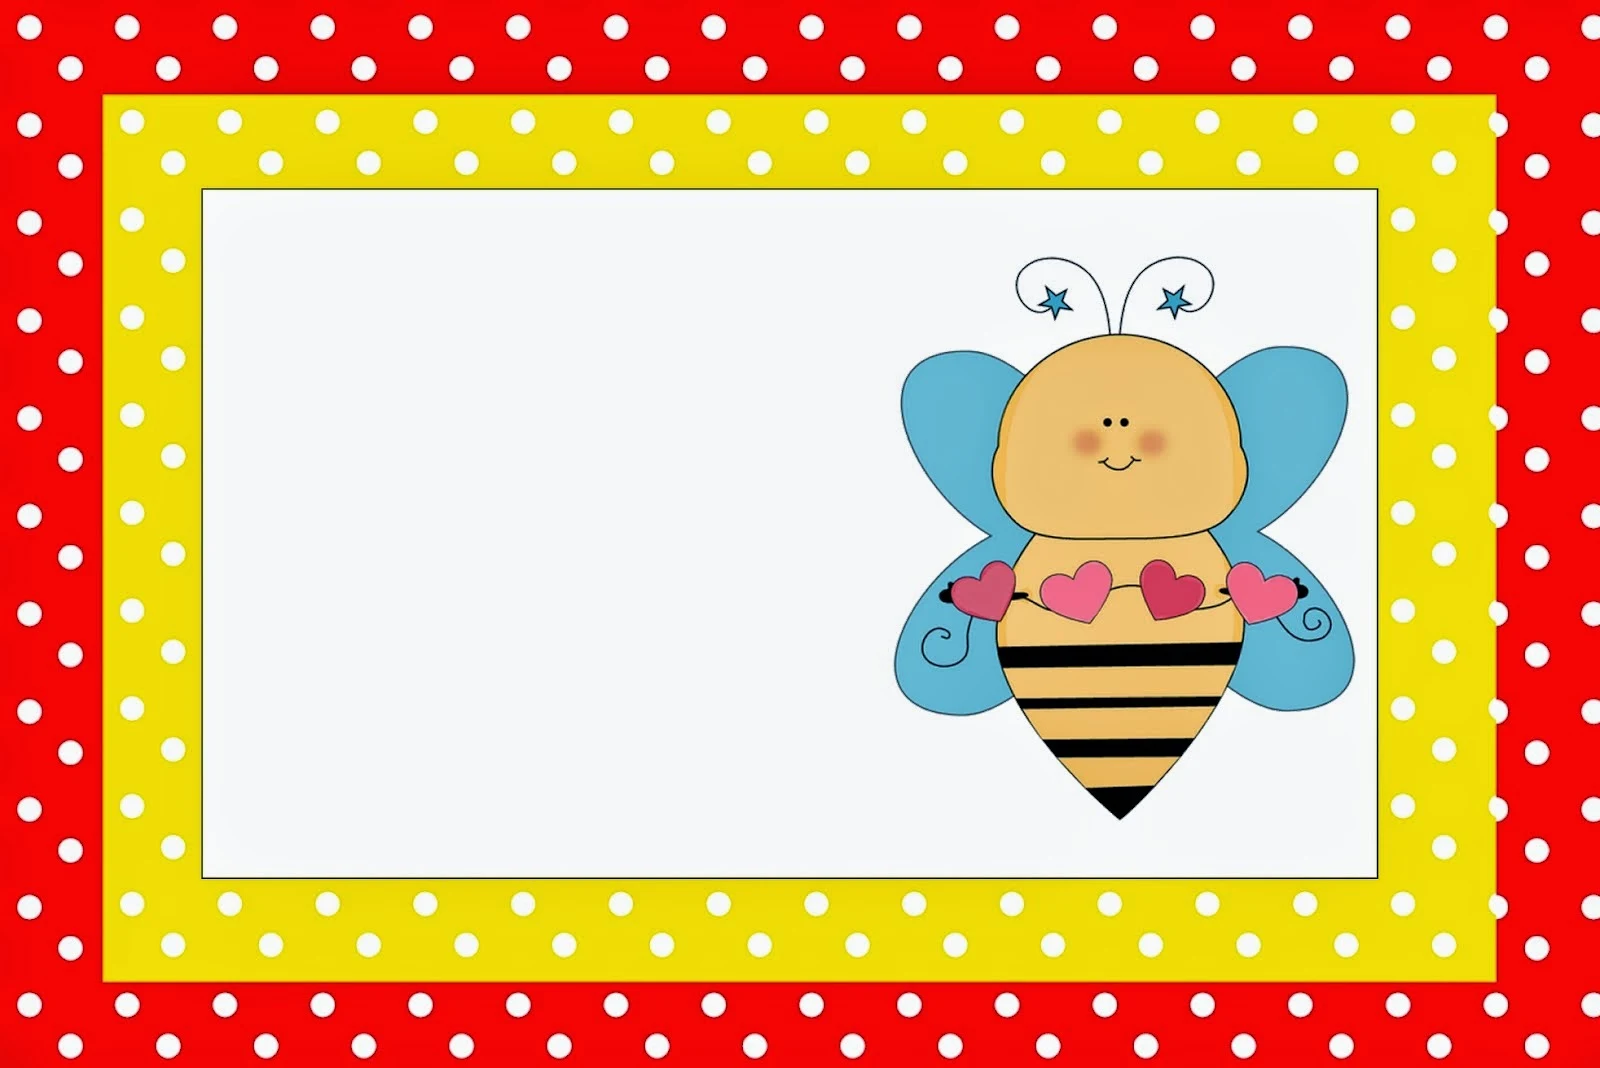 Bees Free Printable Invitations, Labels or Cards.